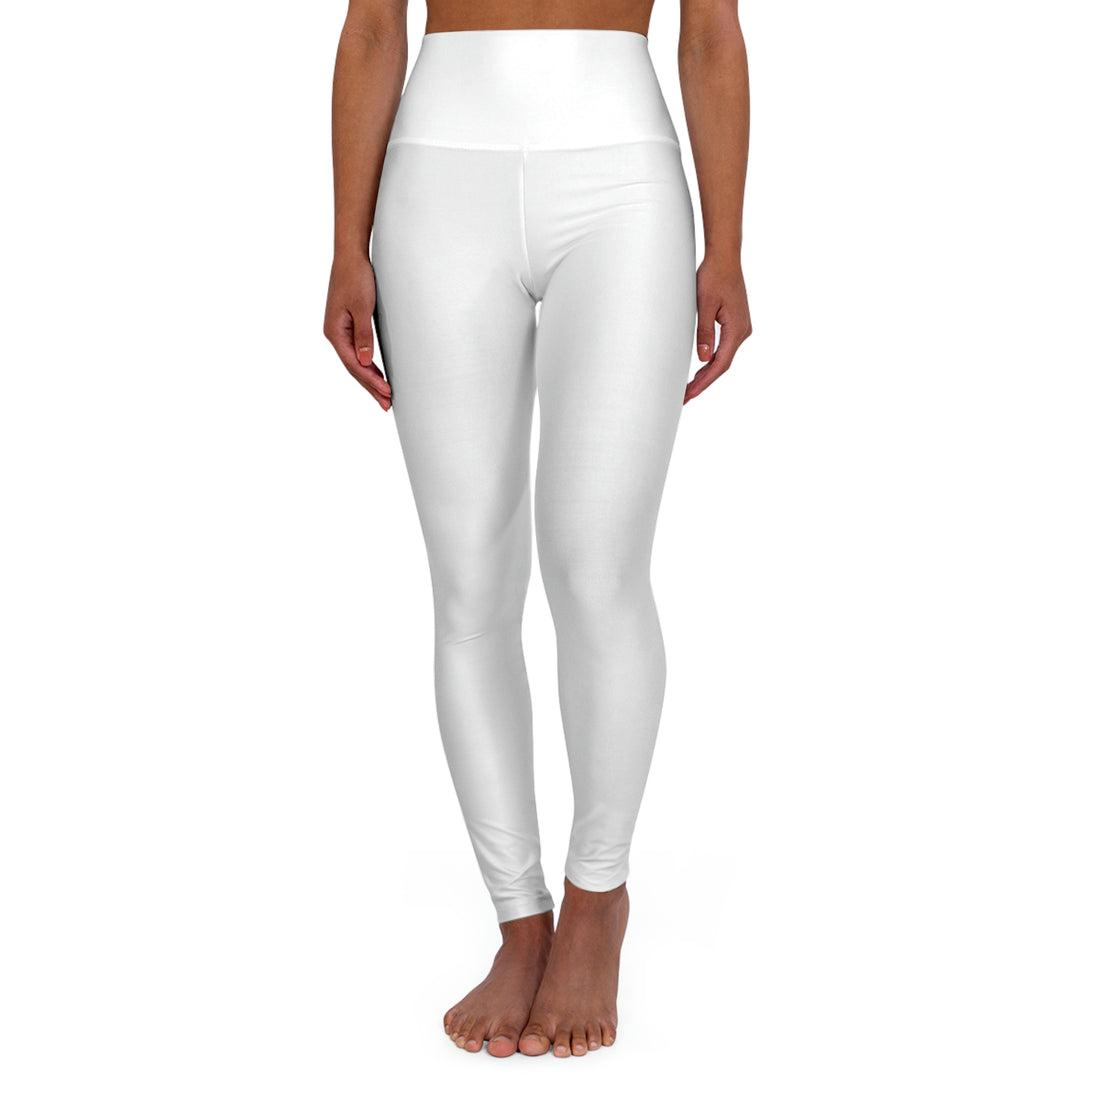 Overcome Through Courage and Strength - White High Waisted Yoga Leggings